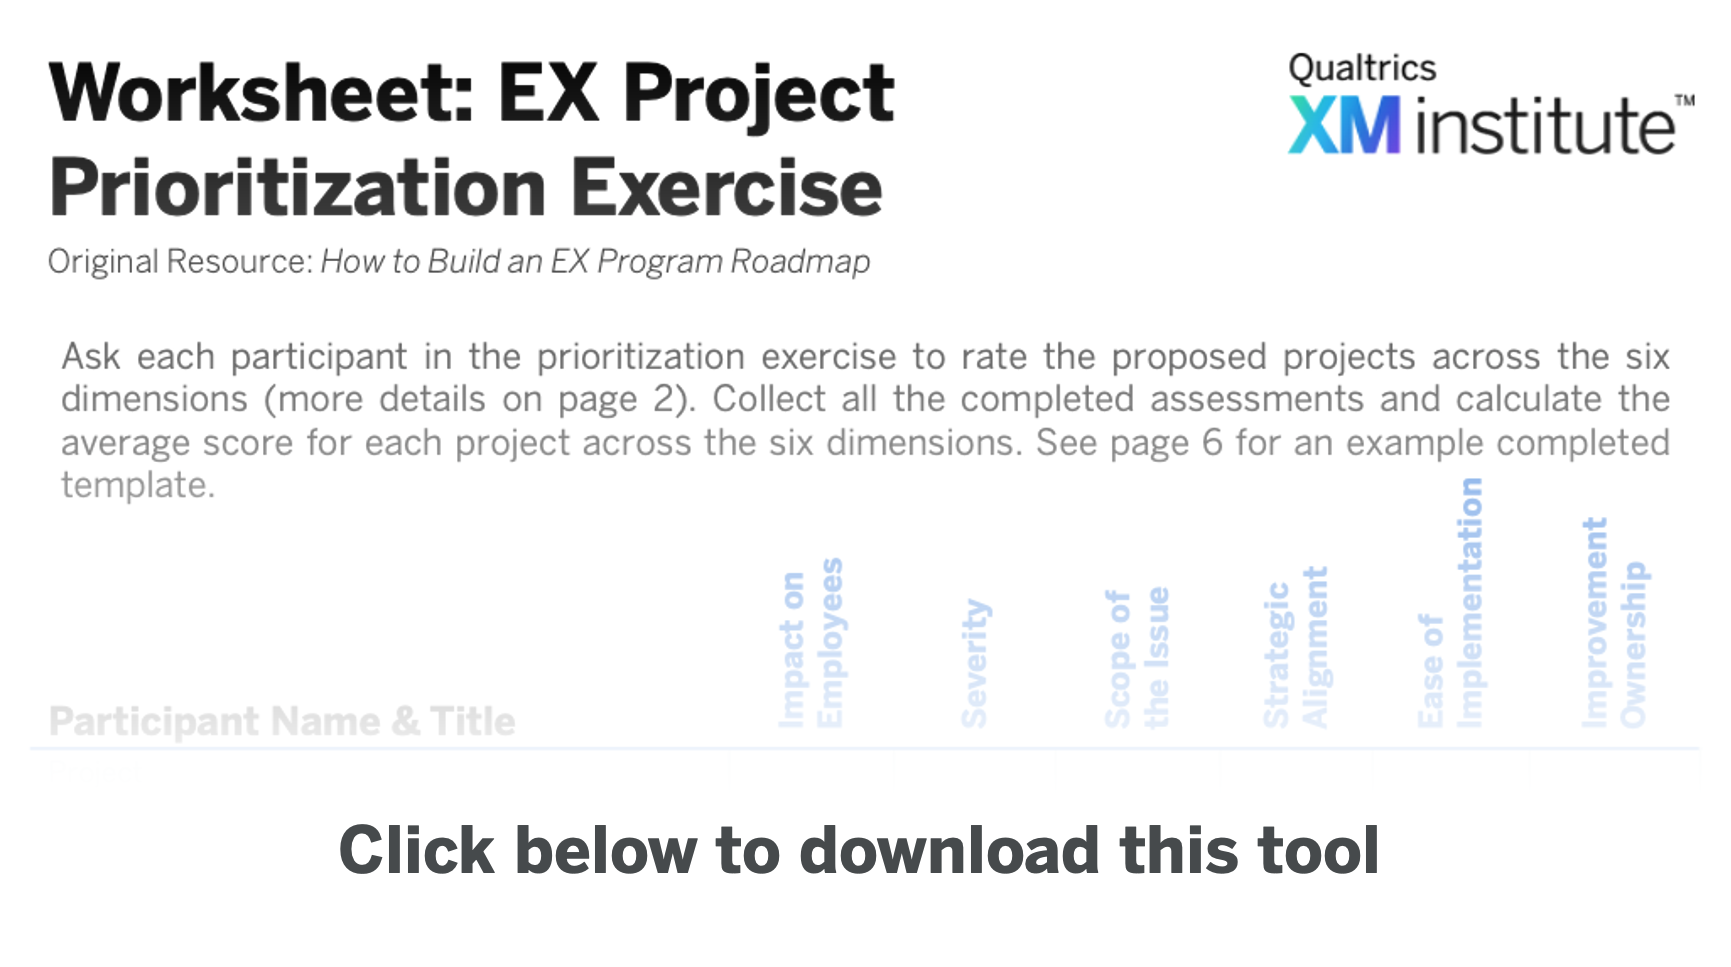 Download Image - EX Project Prioritization Exercise